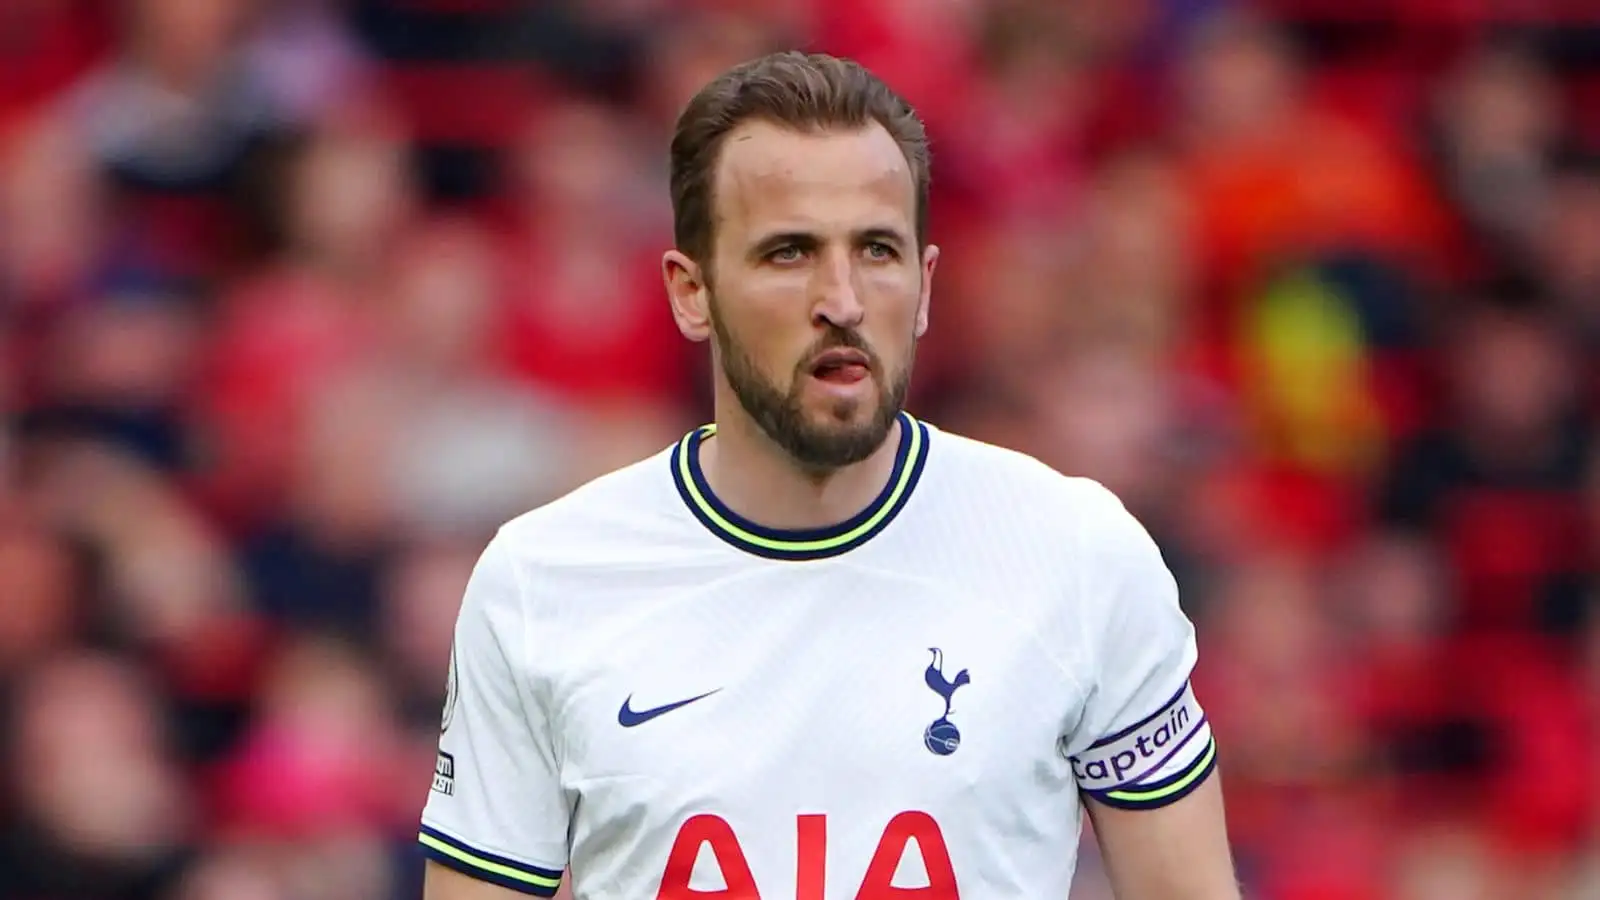 Harry Kane Tottenham captain during Premier League game against Liverpool at Anfield